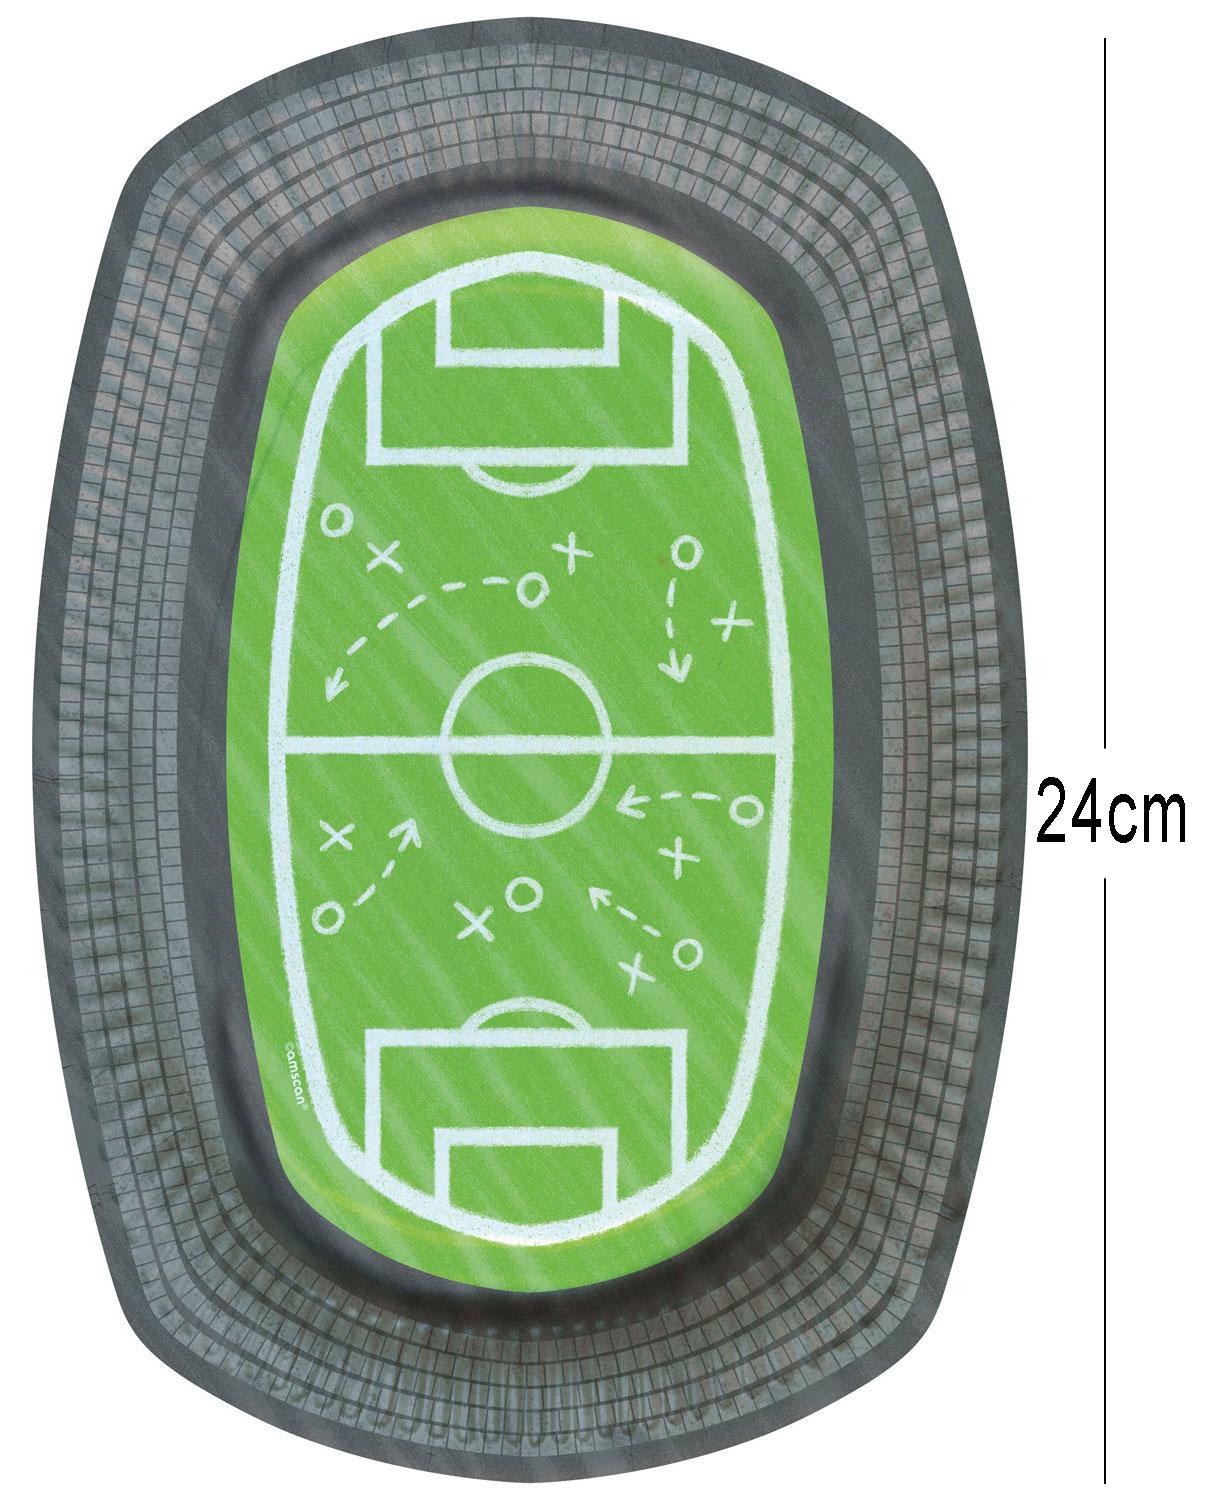 Kicker Party Football Party Plates Pack 6 pcs by Amscan 9903079 available from the Kicker Party Range here at Karnival Costumes online party shop